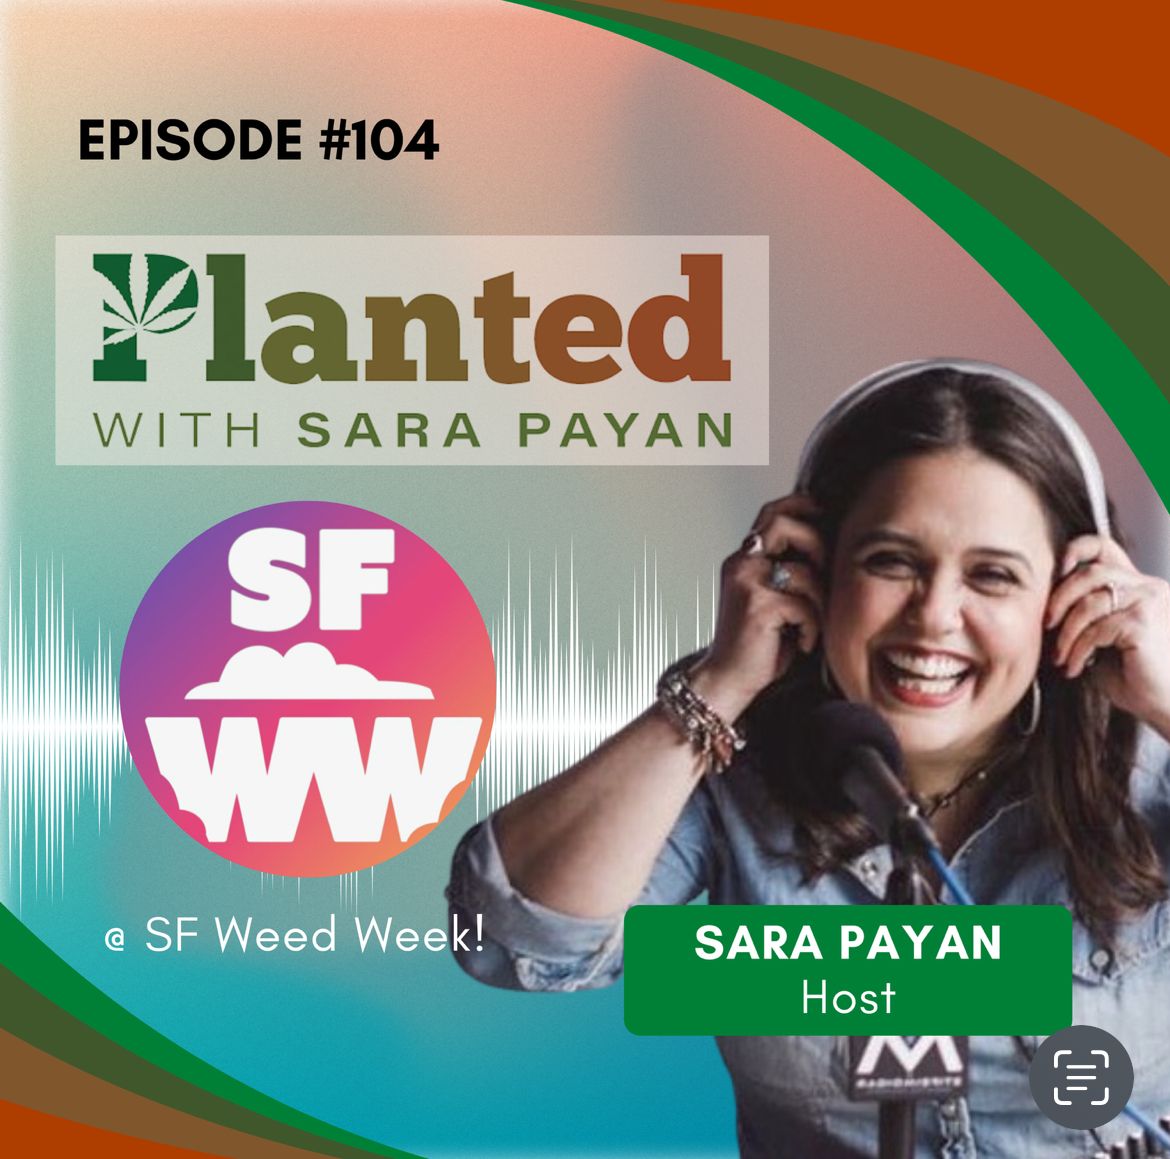 In this special episode, Sara interviews David Downs, @ngaio420 & guests of @sfweedweek 420 celebration. 

 @elisemcroberts @rblposse @jamesloud_ @UP4LIFE @edrosenthal #CannabisCommunity #420day #sfweedweek #CannabisCulture #CannabisIndustry #podcast

🔗  buff.ly/3UoebQy